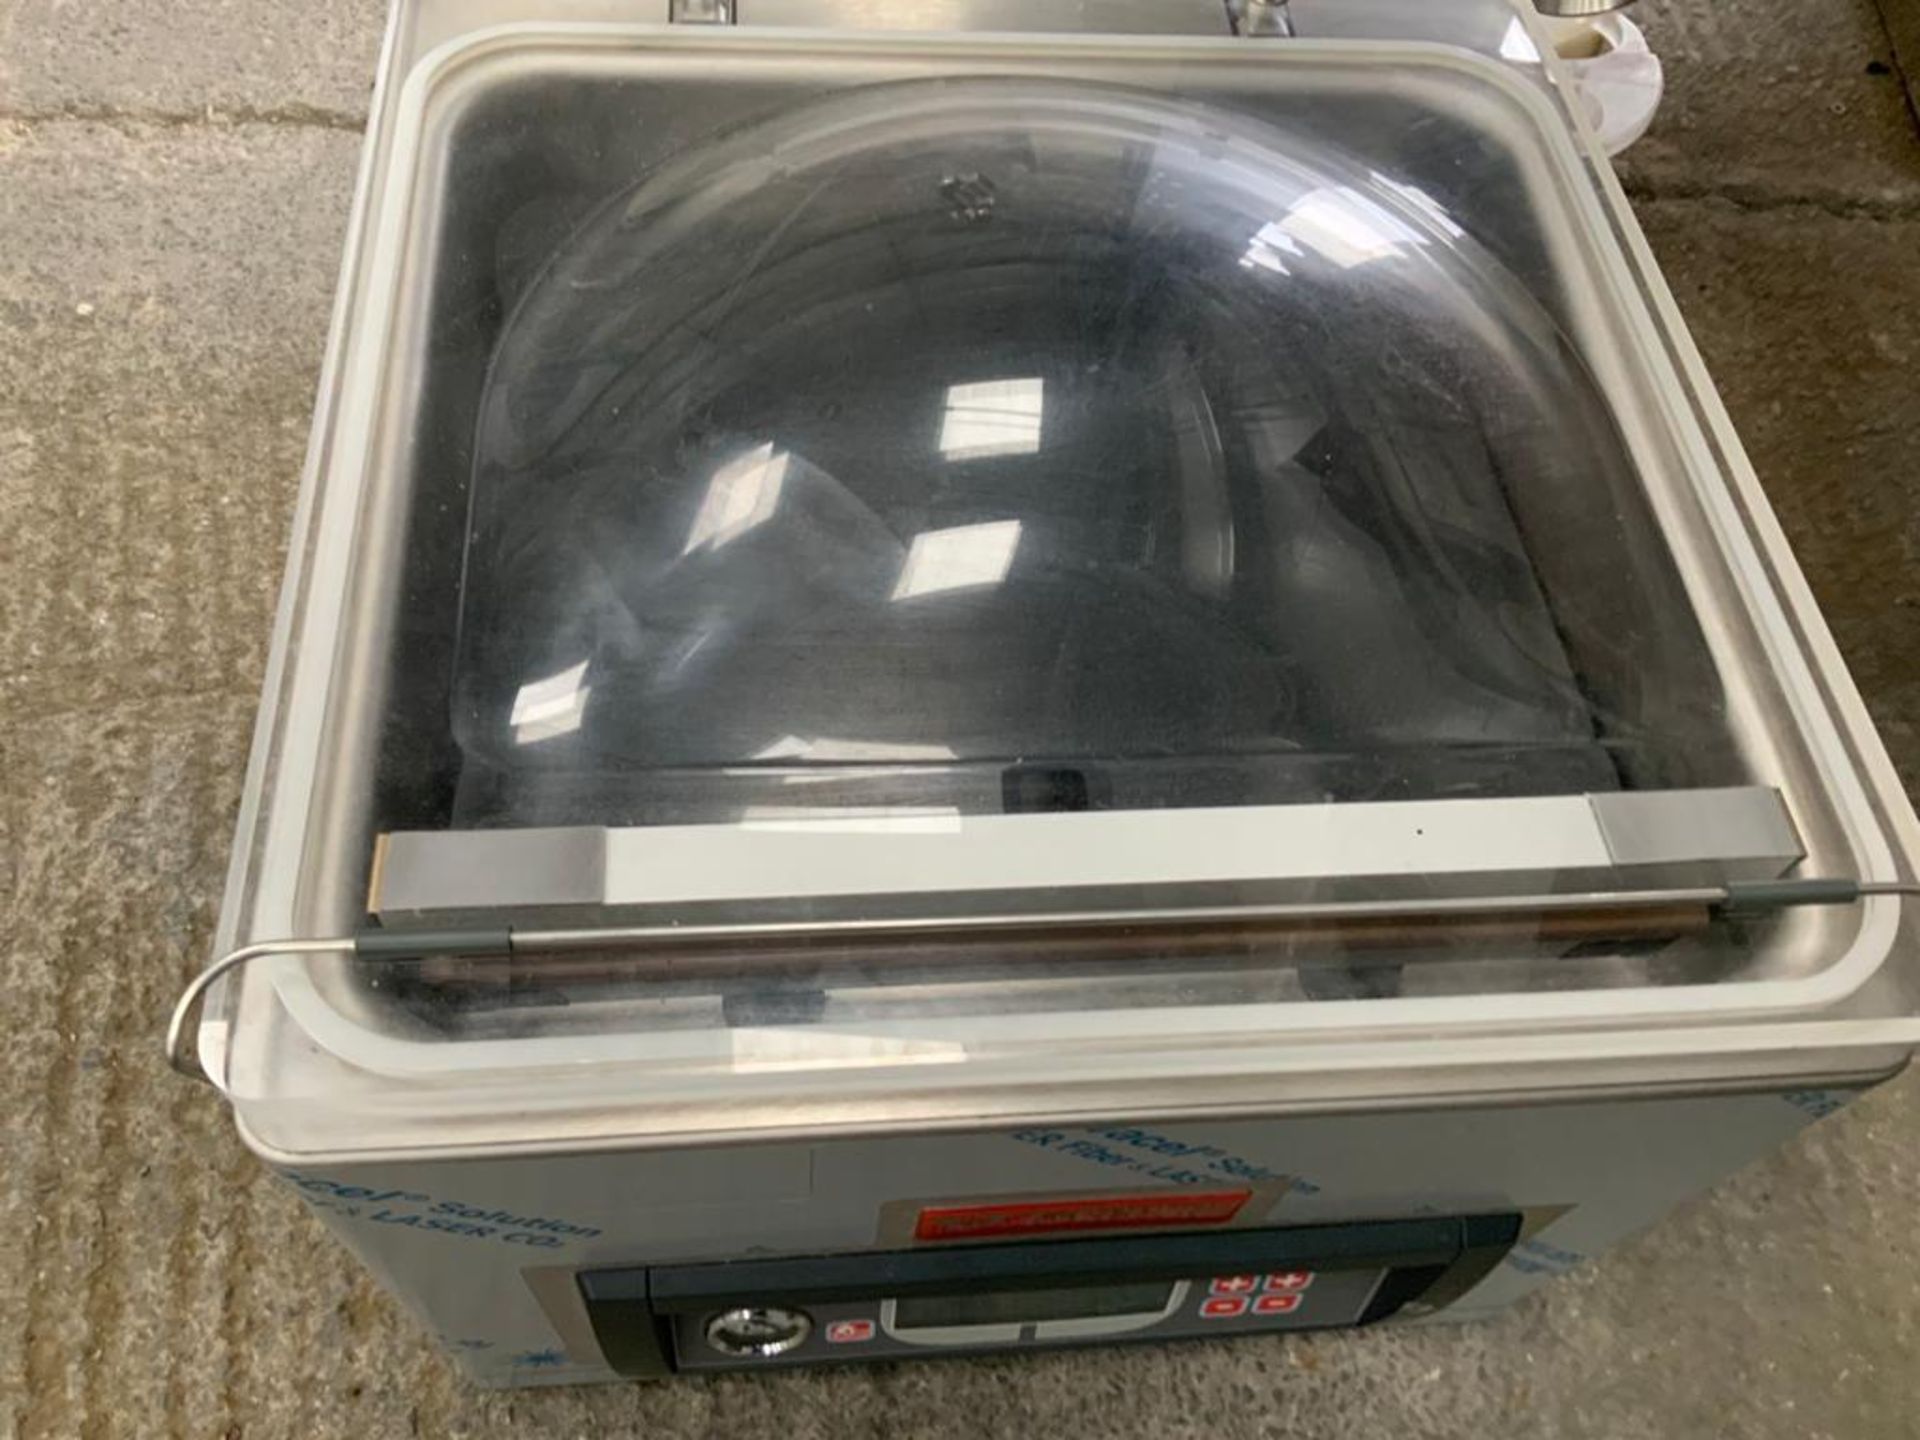 TURBOVAC T40 TABLE TOP VACUM PACKER 2023 LOCATION CO.DOWN N.IRELAND